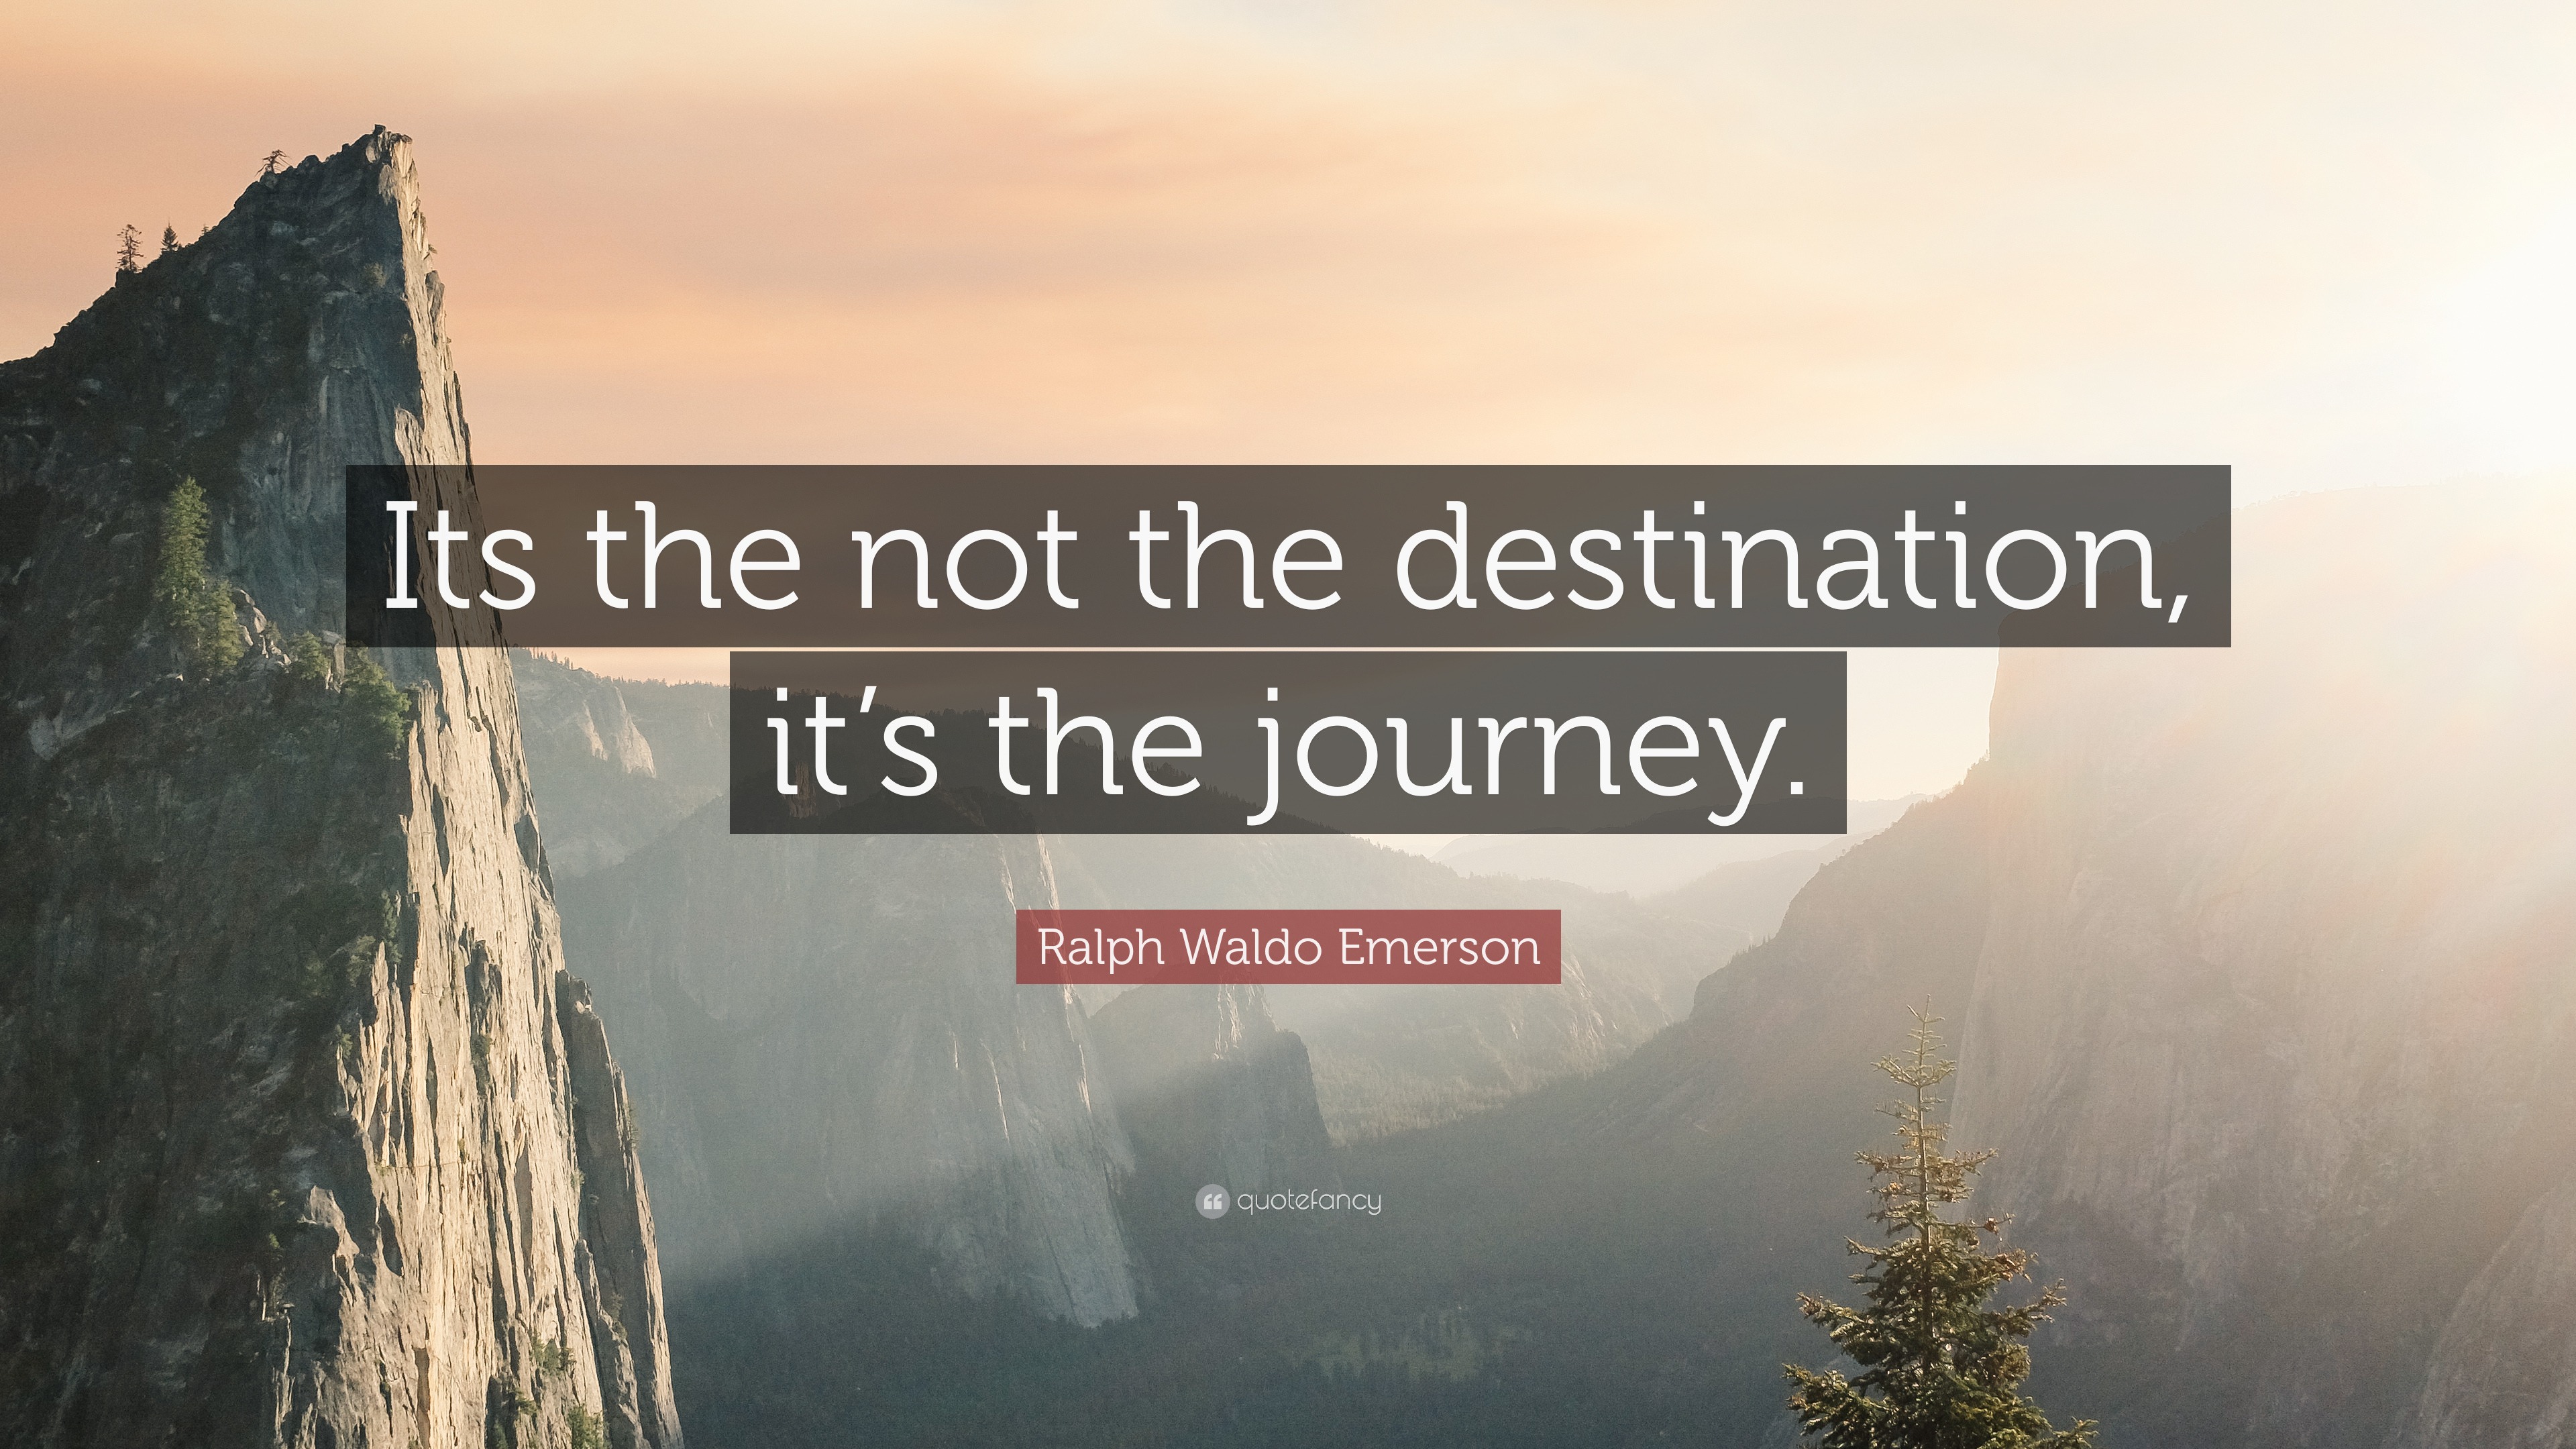 Ralph Waldo Emerson Quote: “Its the not the destination, it’s the journey.”